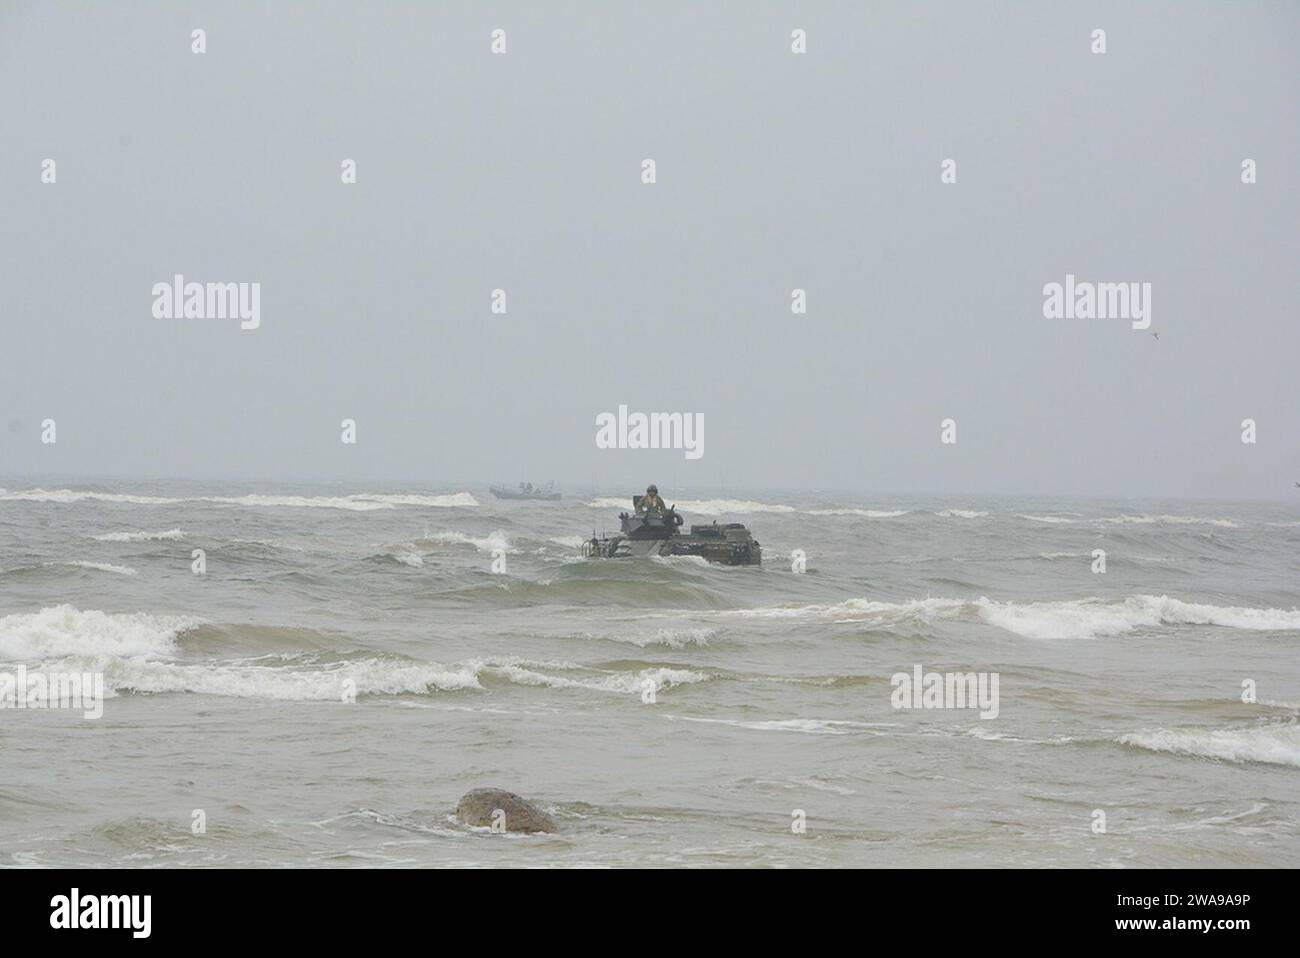 US military forces. 180604WF810-010 KLAIPEDA, Lithuania (June 4, 2018) An AAV-P7/A1 assault amphibious vehicle (USMC), carrying U.S. and Romanian Marine personnel moves towards the shore during a simulated amphibious assault as part of Baltic Operations (BALTOPS) 2018. BALTOPS is the premier annual maritime-focused exercise in the Baltic region and one of the largest exercises in Northern Europe enhancing flexibility and interoperability among allied and partner nations. (U.S. Navy photo by Mass Communication Specialist 1st Class Adam C. Stapleton/Released) Stock Photo